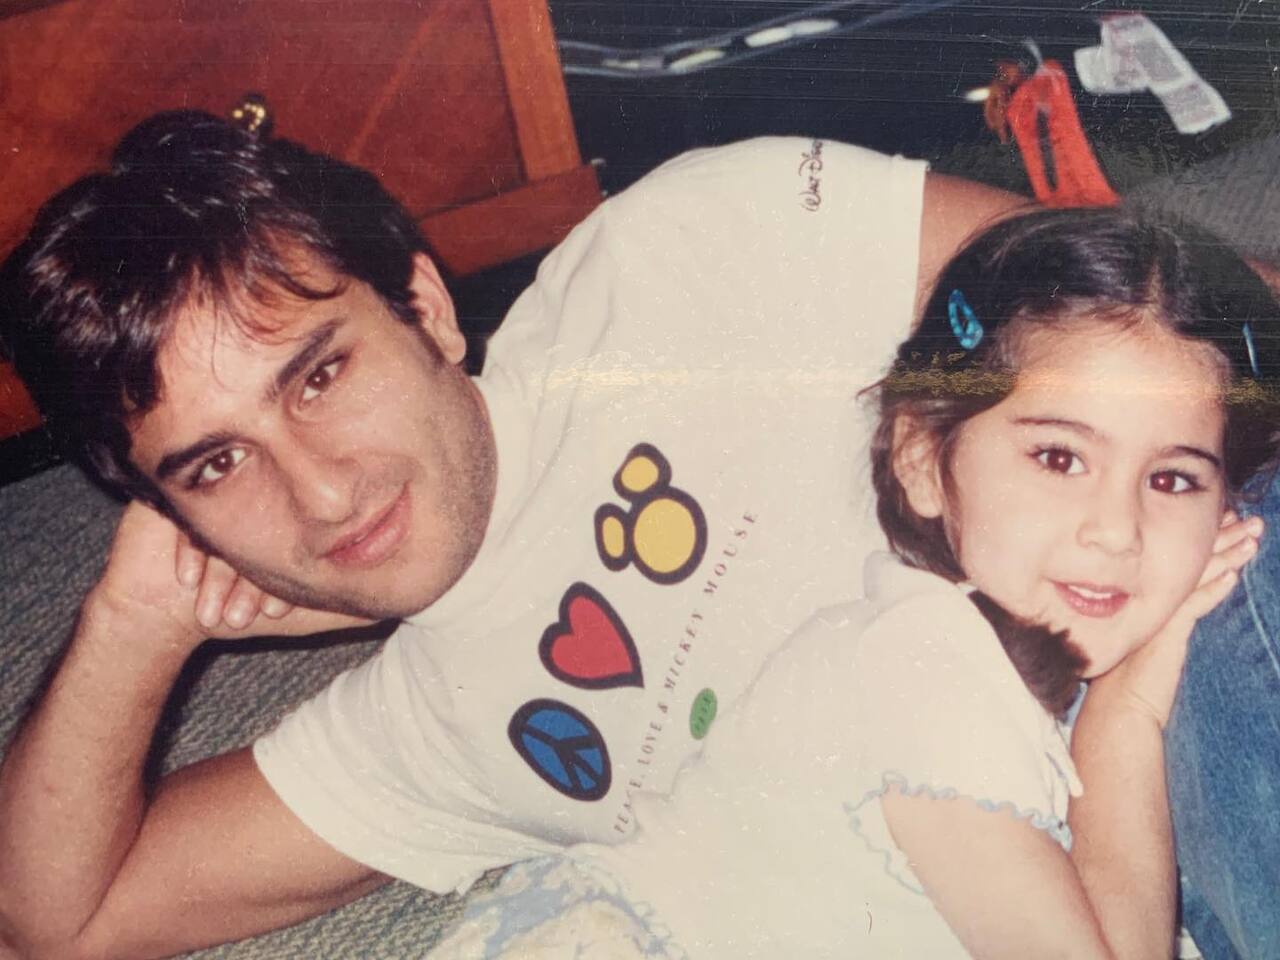 It doesn't get cuter than plump-cheeked Sara Ali Khan leaning against her 'Abba's' lap. A true pillar of support!